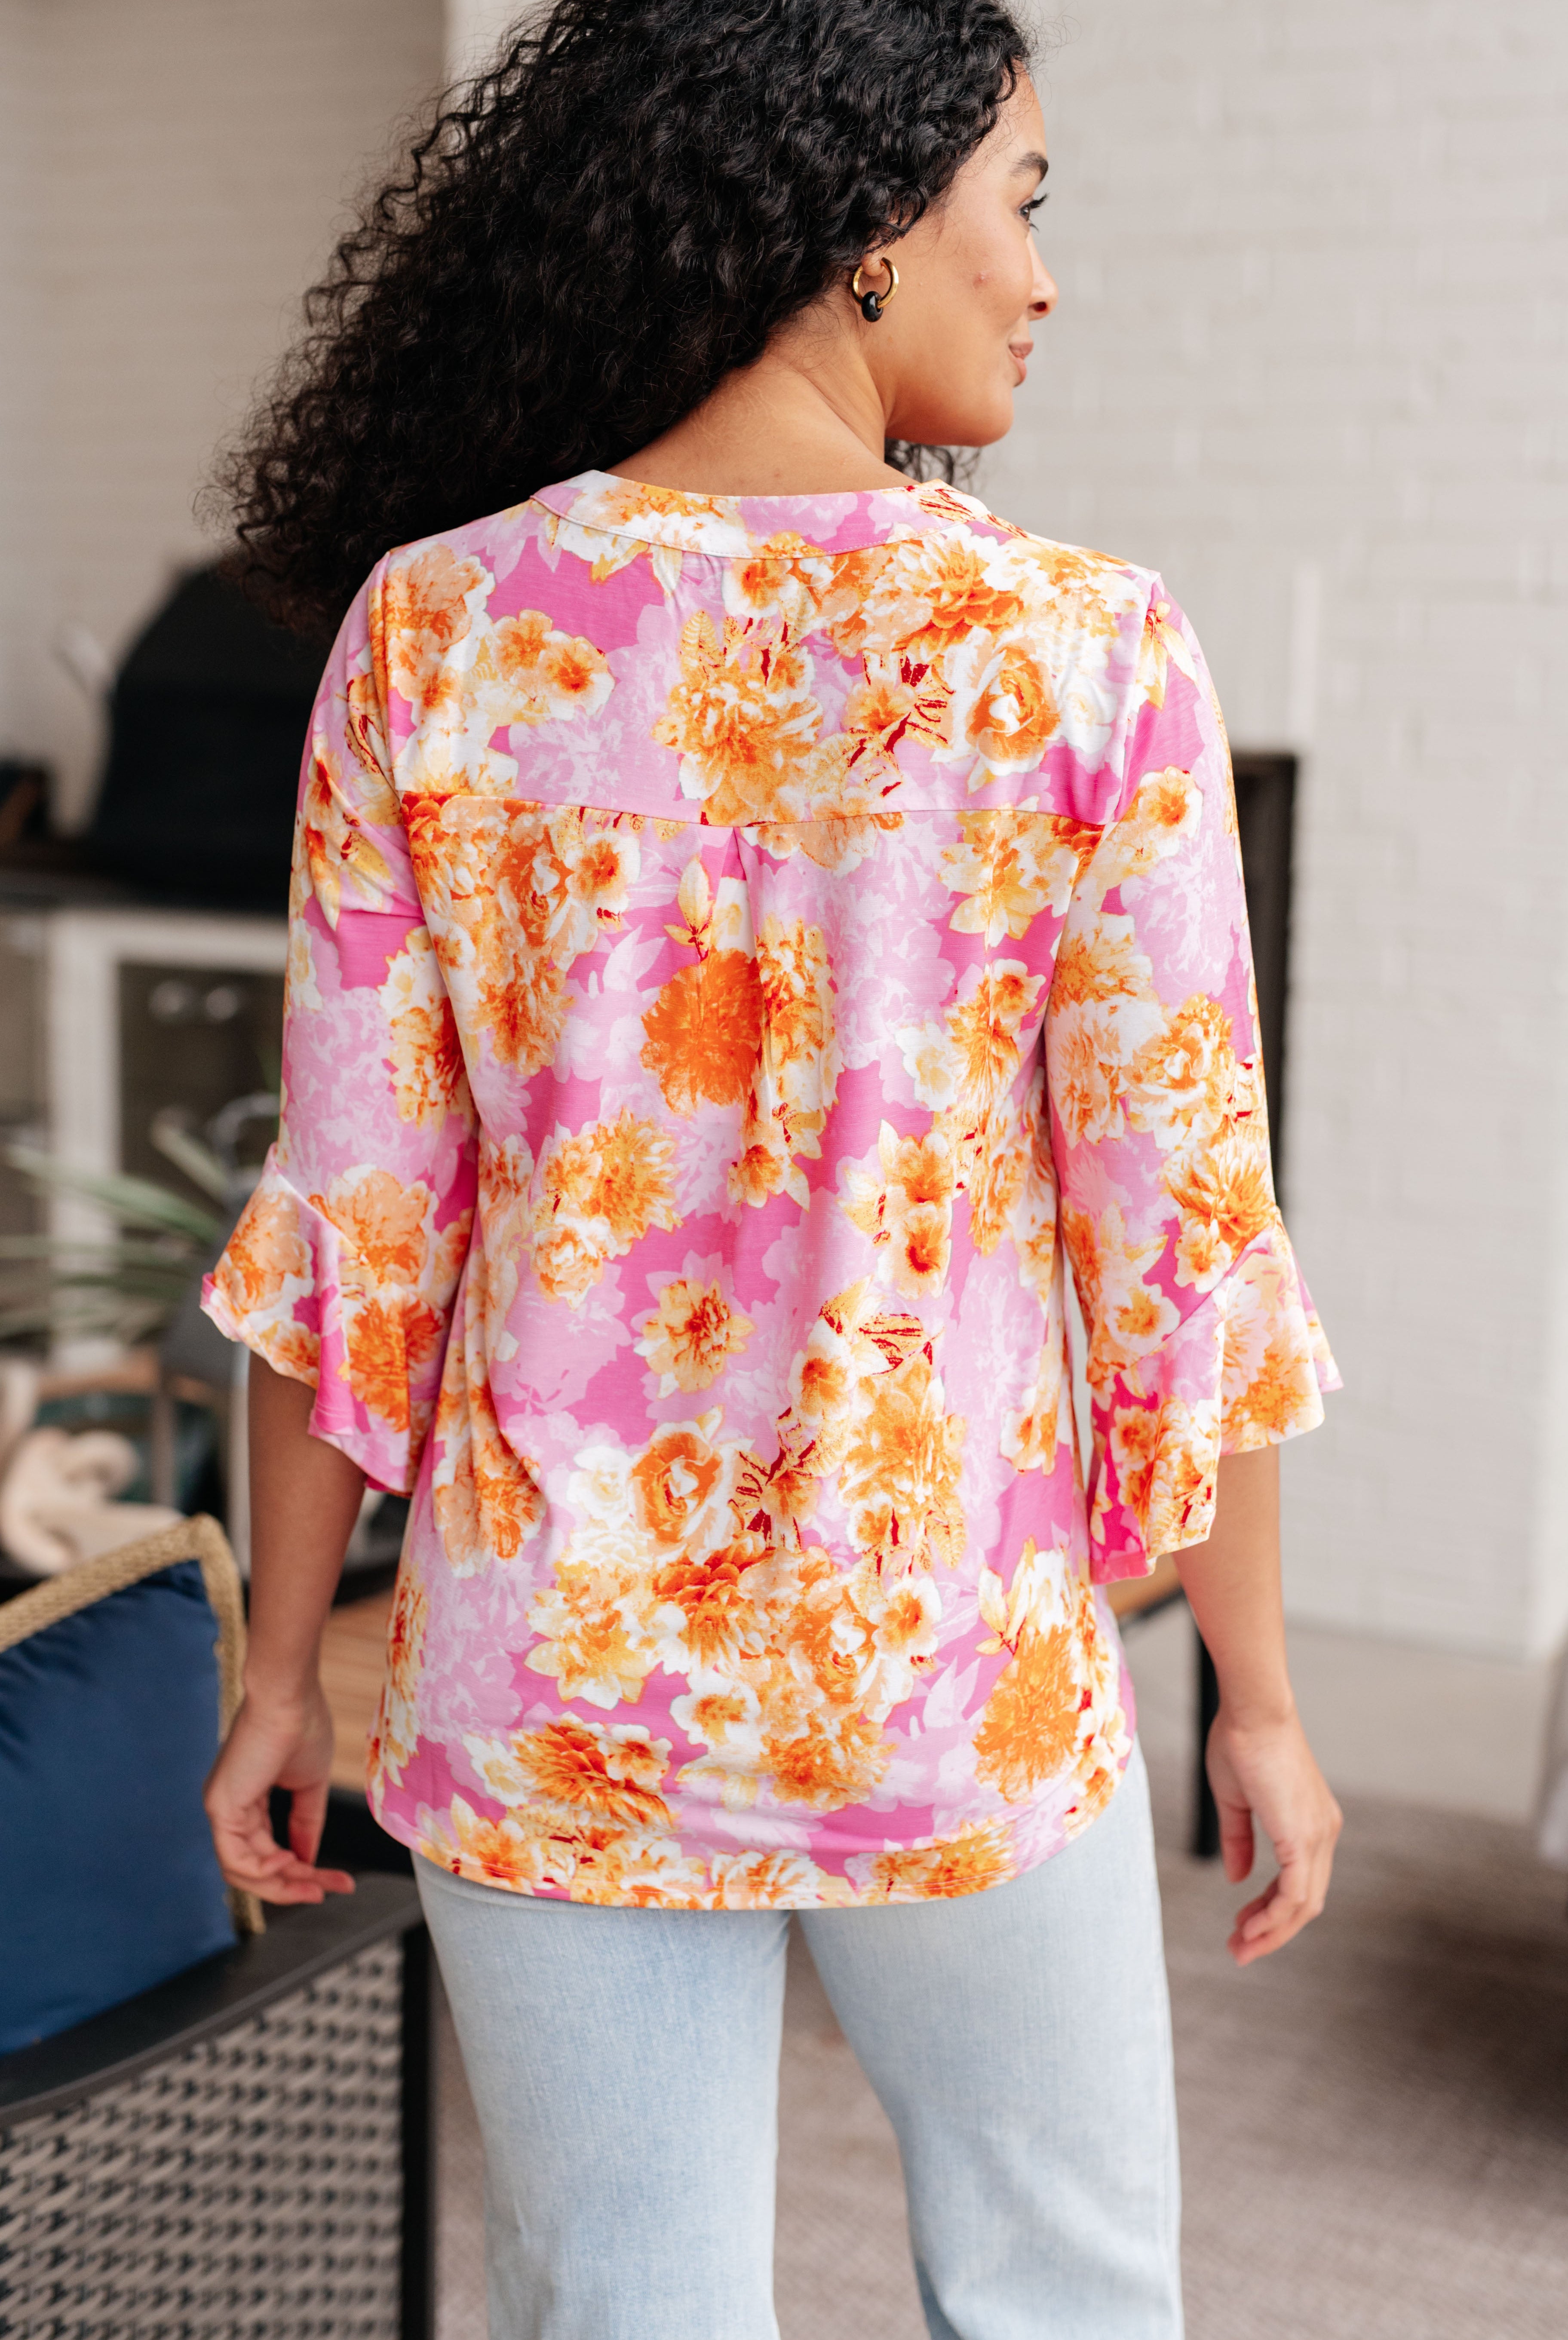 Lizzy Bell Sleeve Top in Pink and Gold Floral-Short Sleeves-Ave Shops-Urban Threadz Boutique, Women's Fashion Boutique in Saugatuck, MI